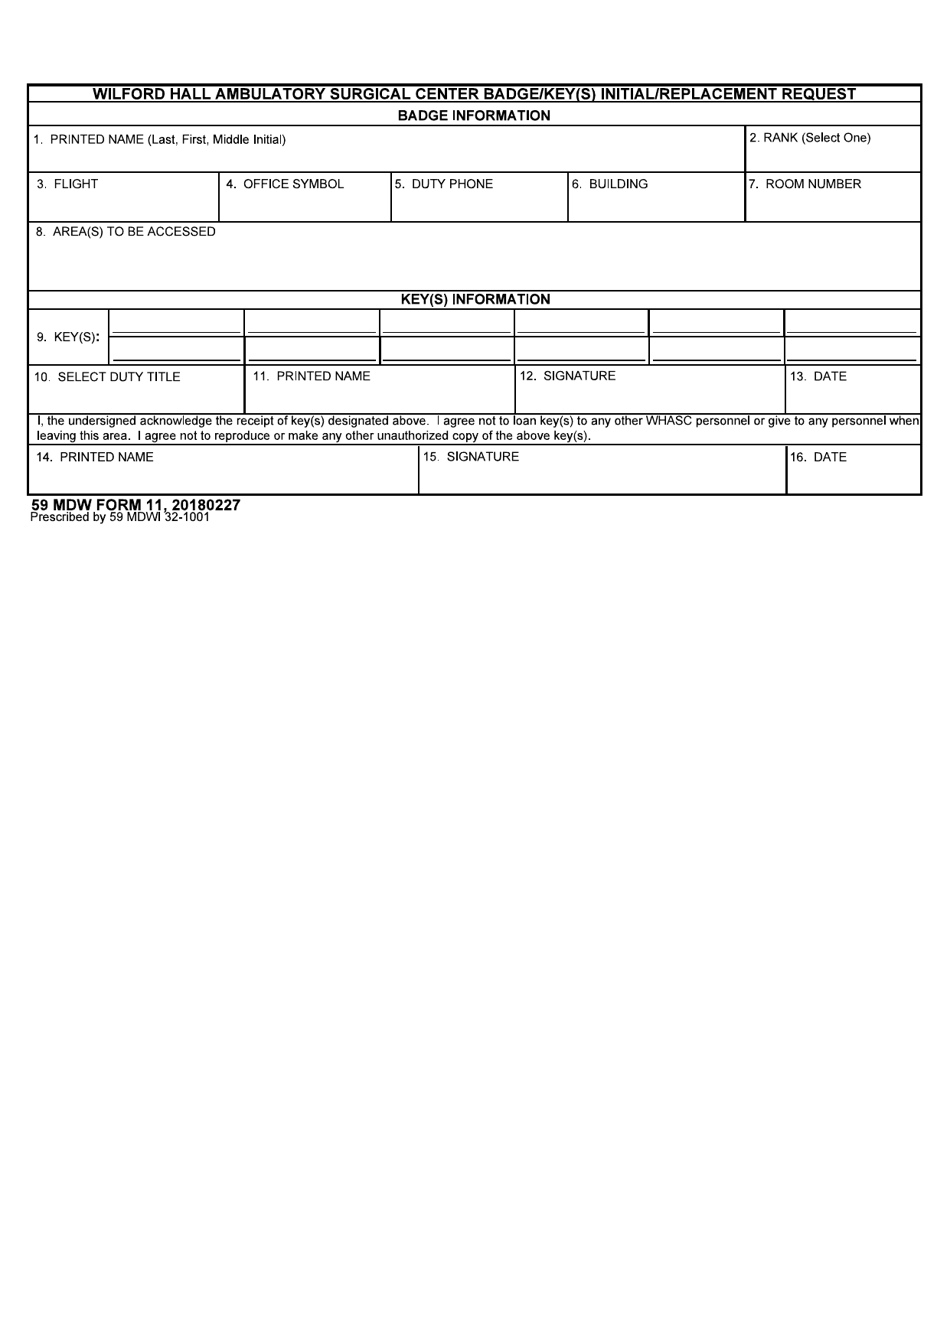 59 MDW Form 11 Wilford Hall Ambulatory Surgical Center Badge / Key(S) Initial / Replacement Request, Page 1